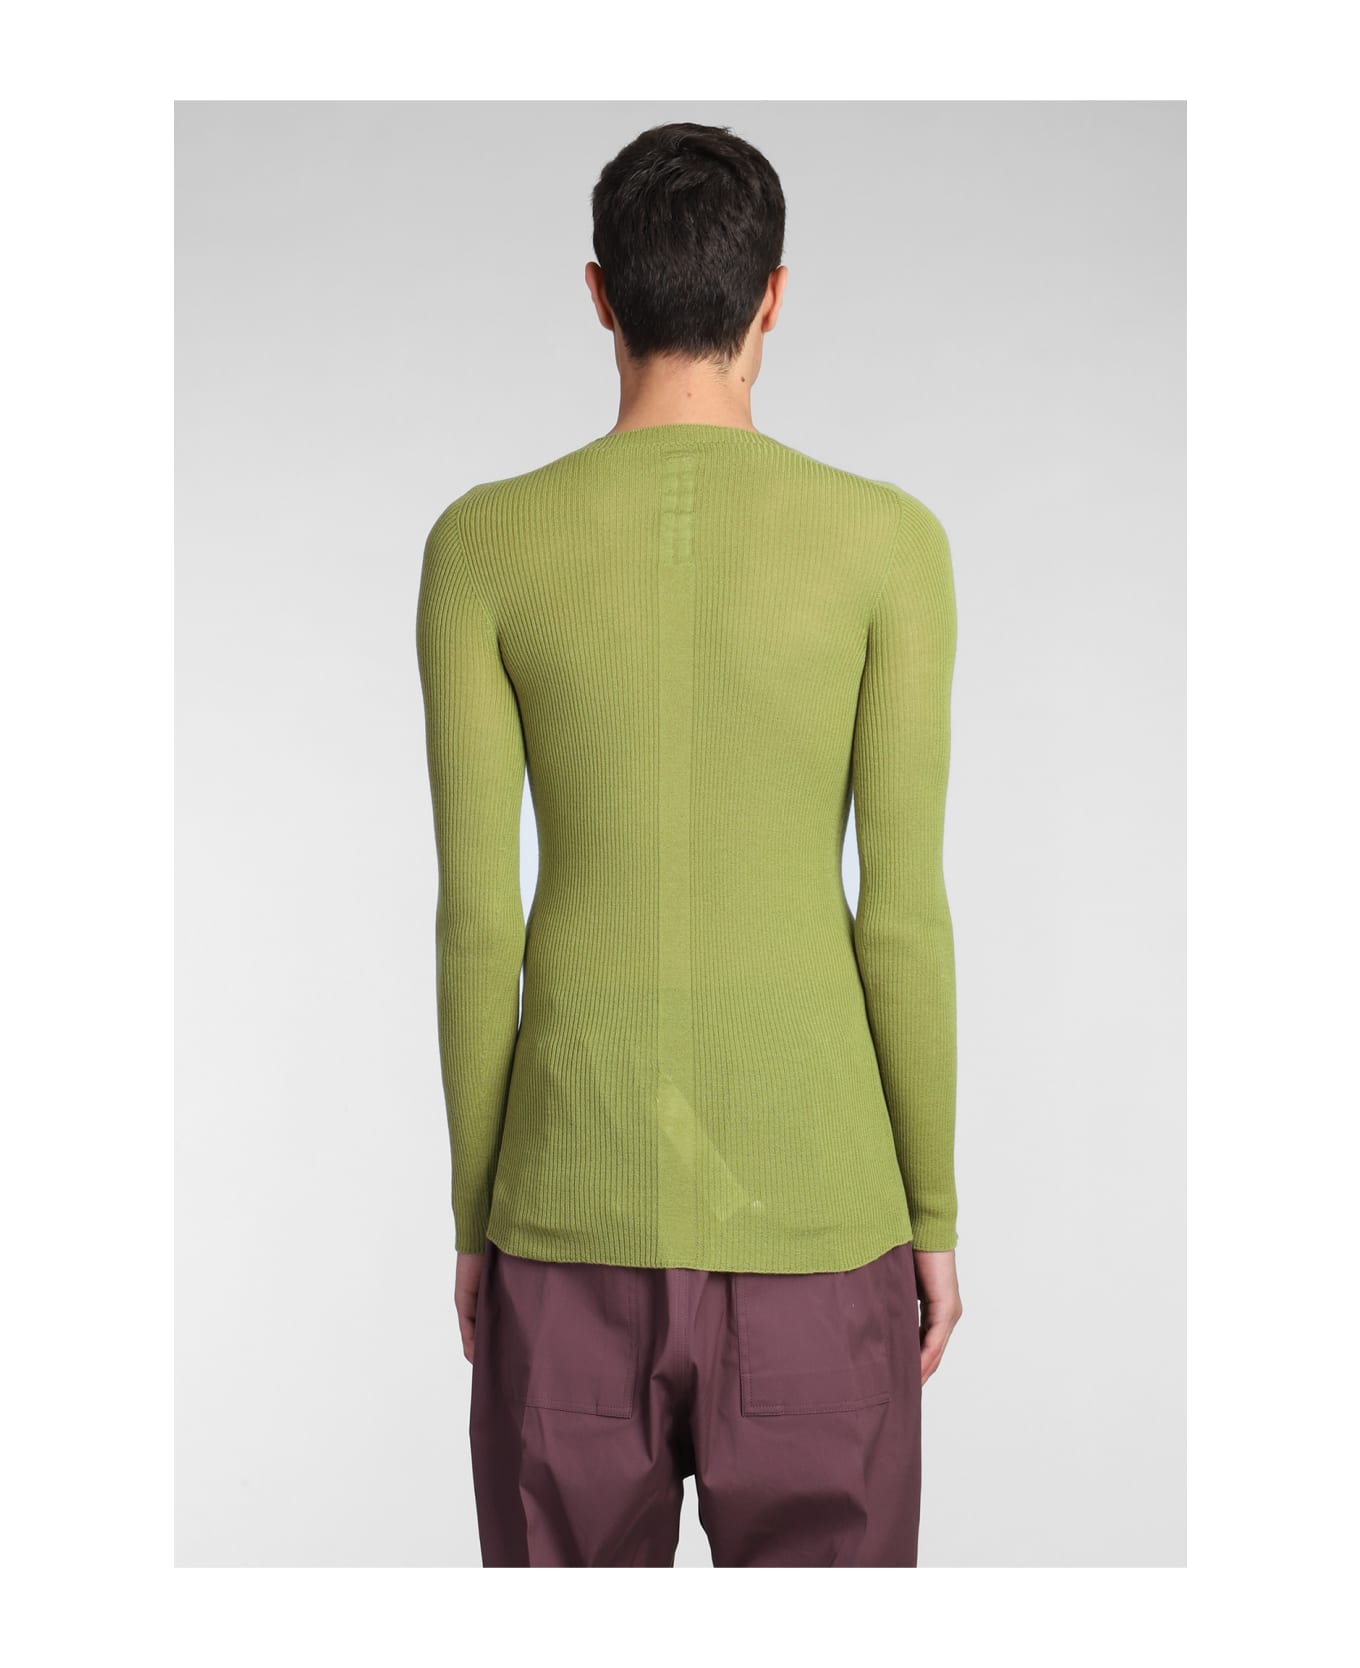 Rick Owens Ribbed Round Knitwear In Green Wool - green ニットウェア